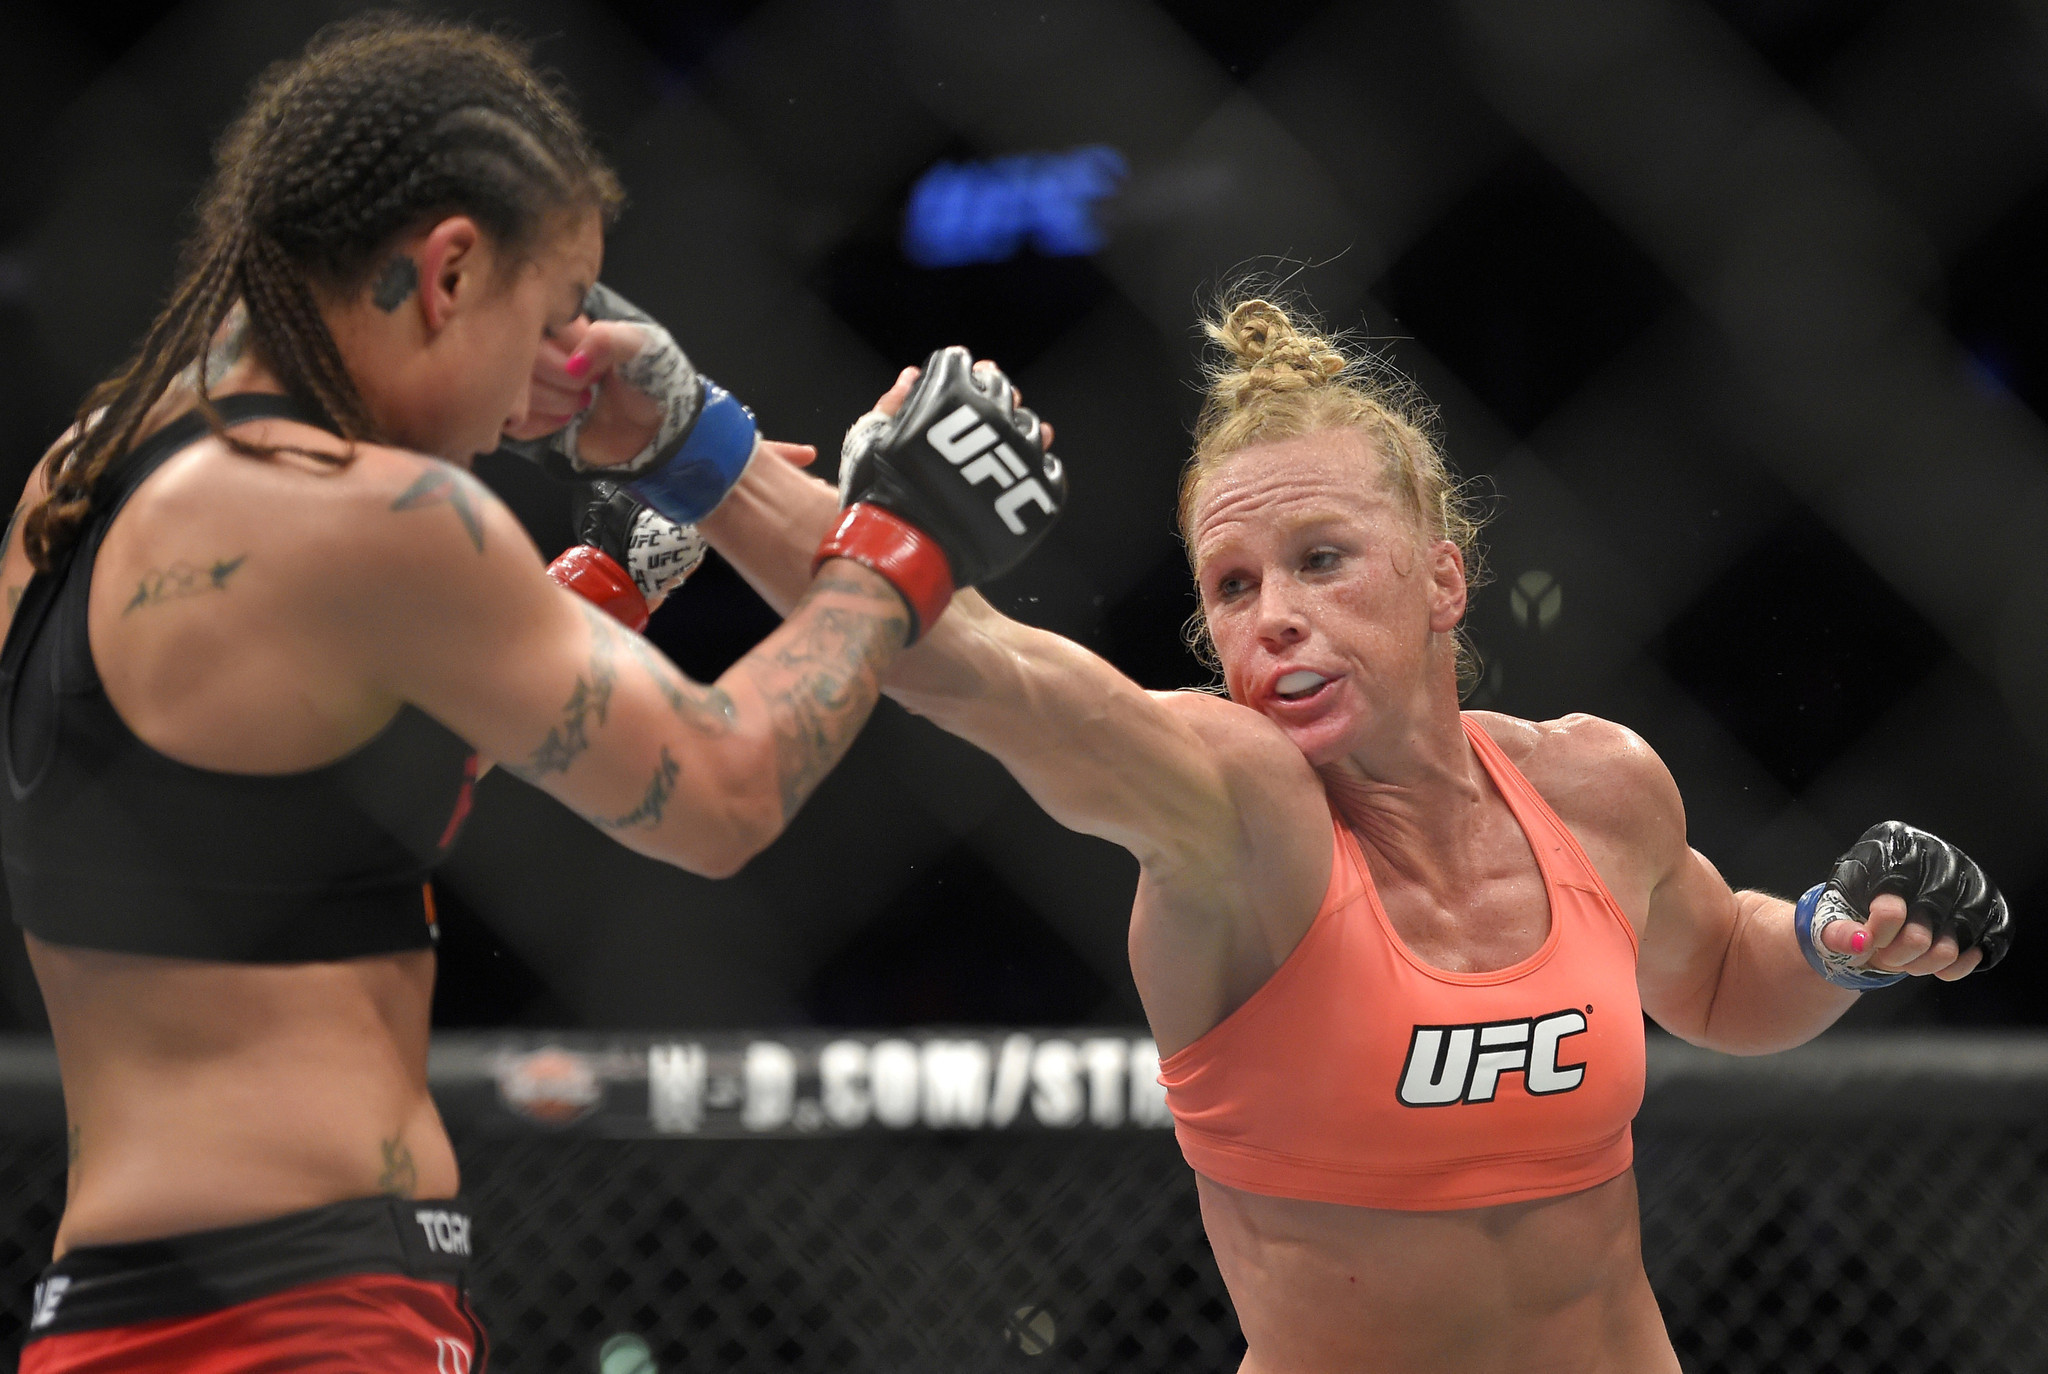 'Excited' Holly Holm says, 'Let's do this,' to Ronda Rousey fight - LA Times